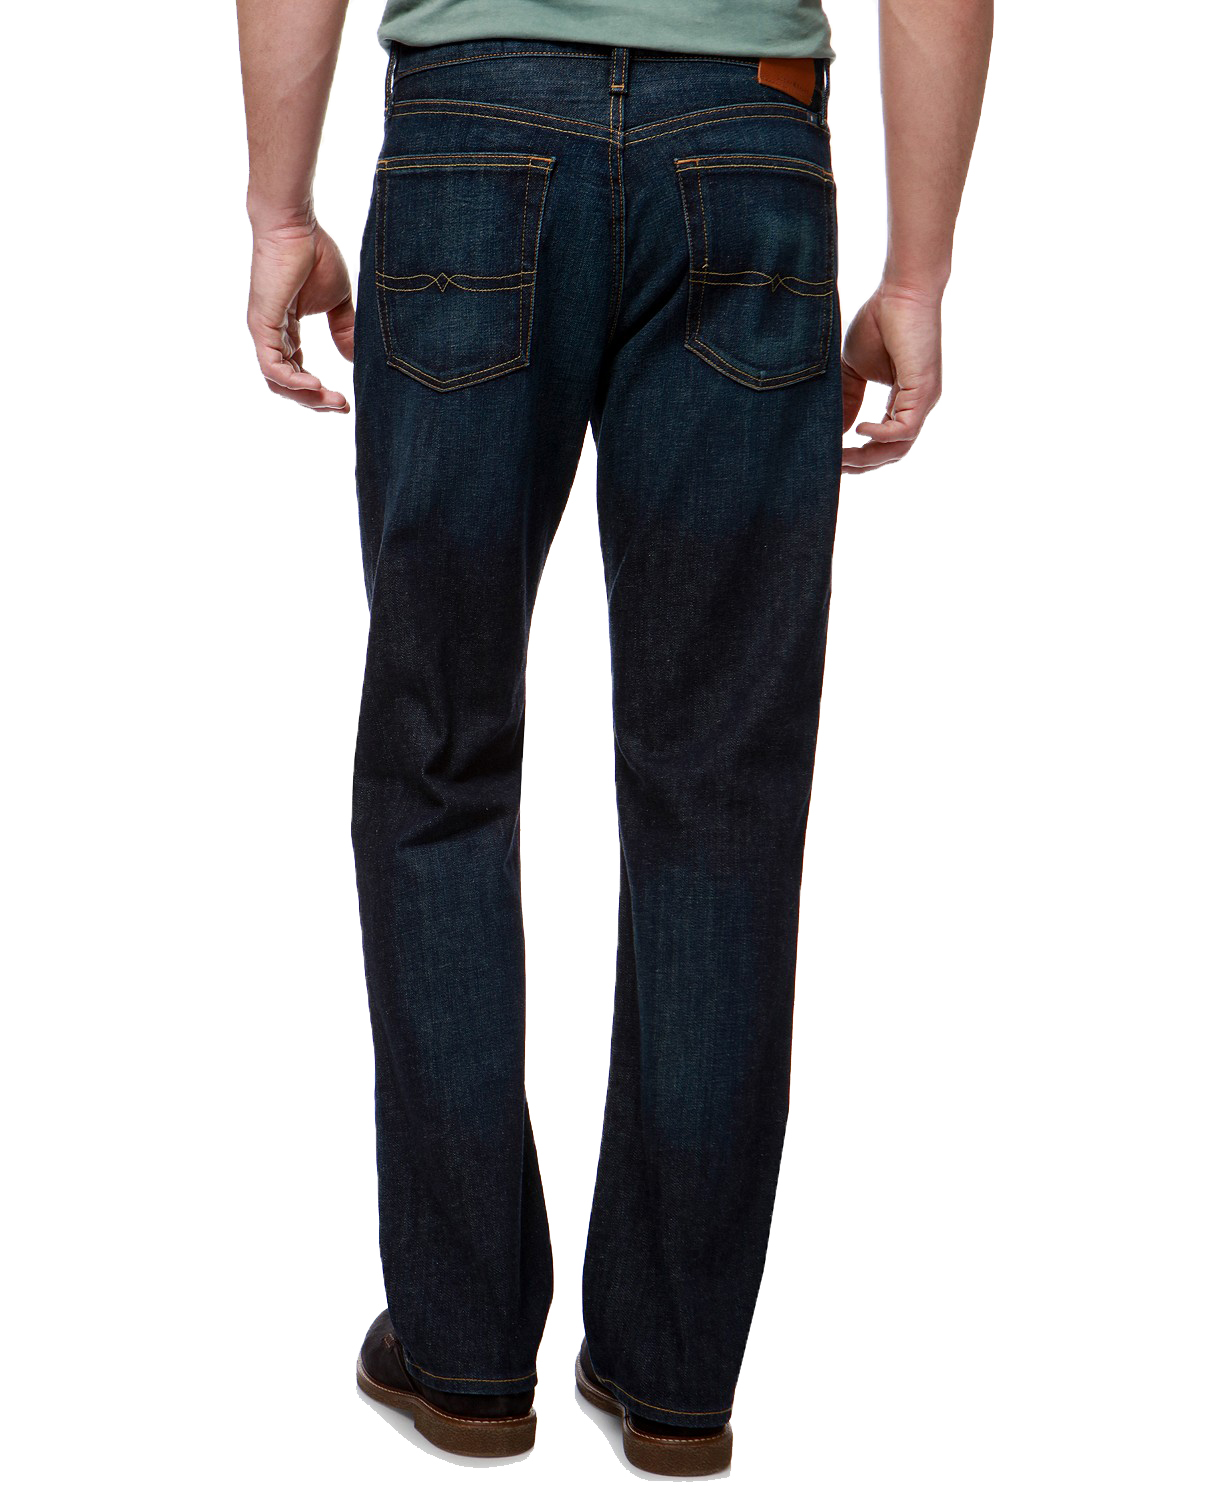 woocommerce-673321-2209615.cloudwaysapps.com-lucky-brand-mens-blue-181-relaxed-straight-fit-jeans